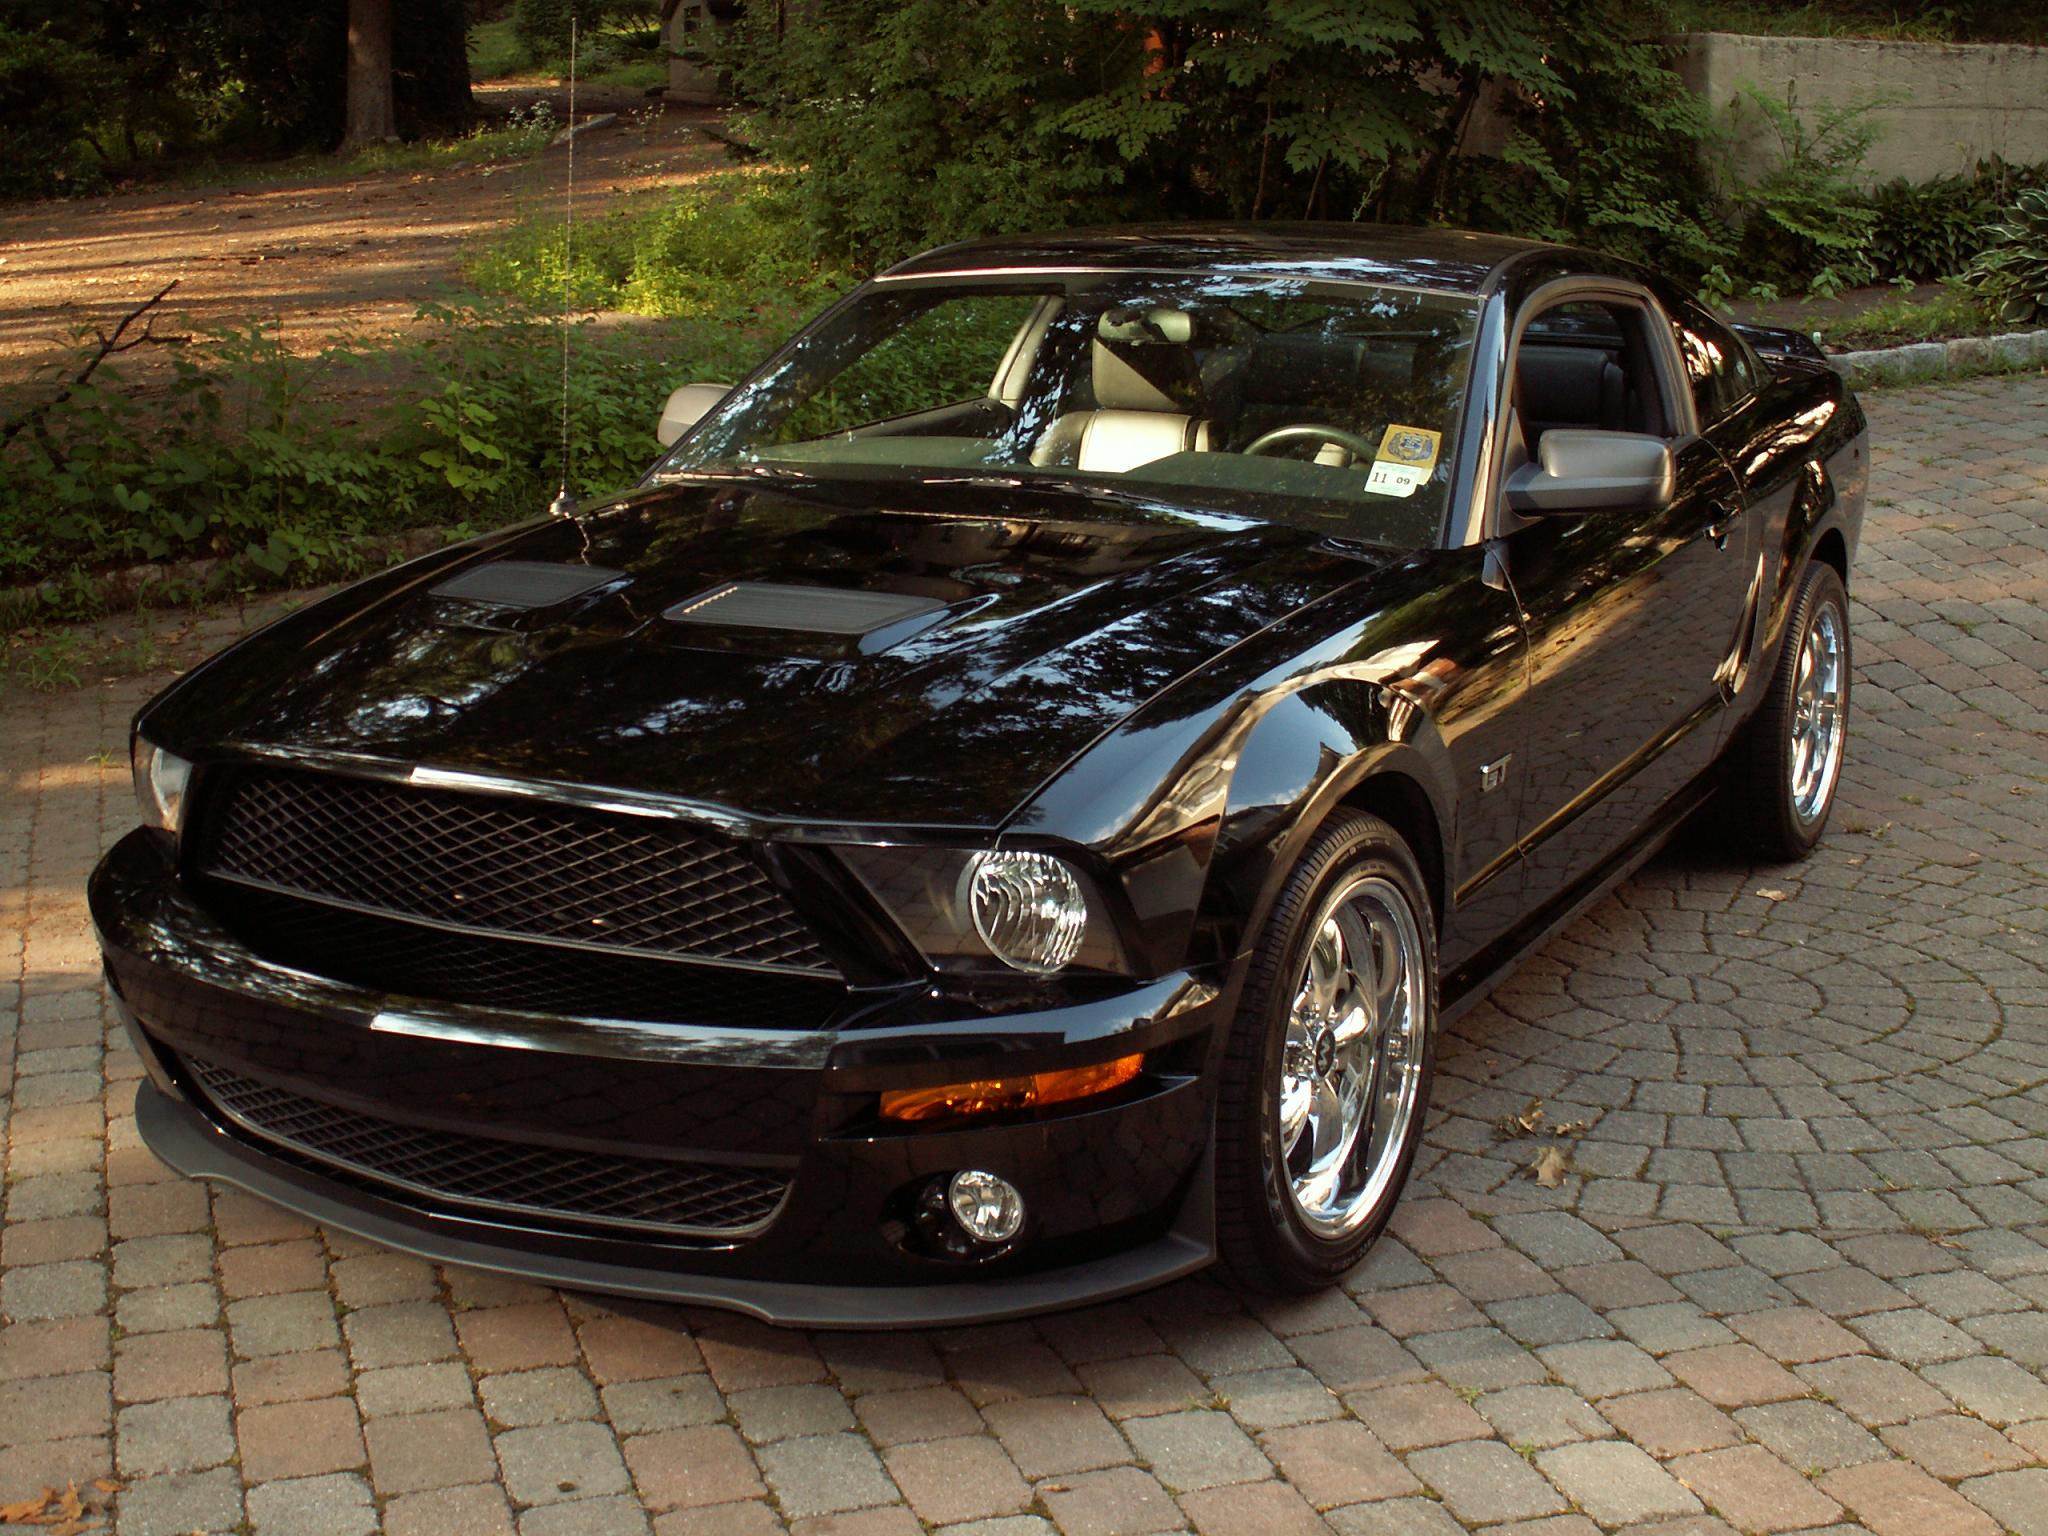 2006 Ford mustang 0-60 times #4